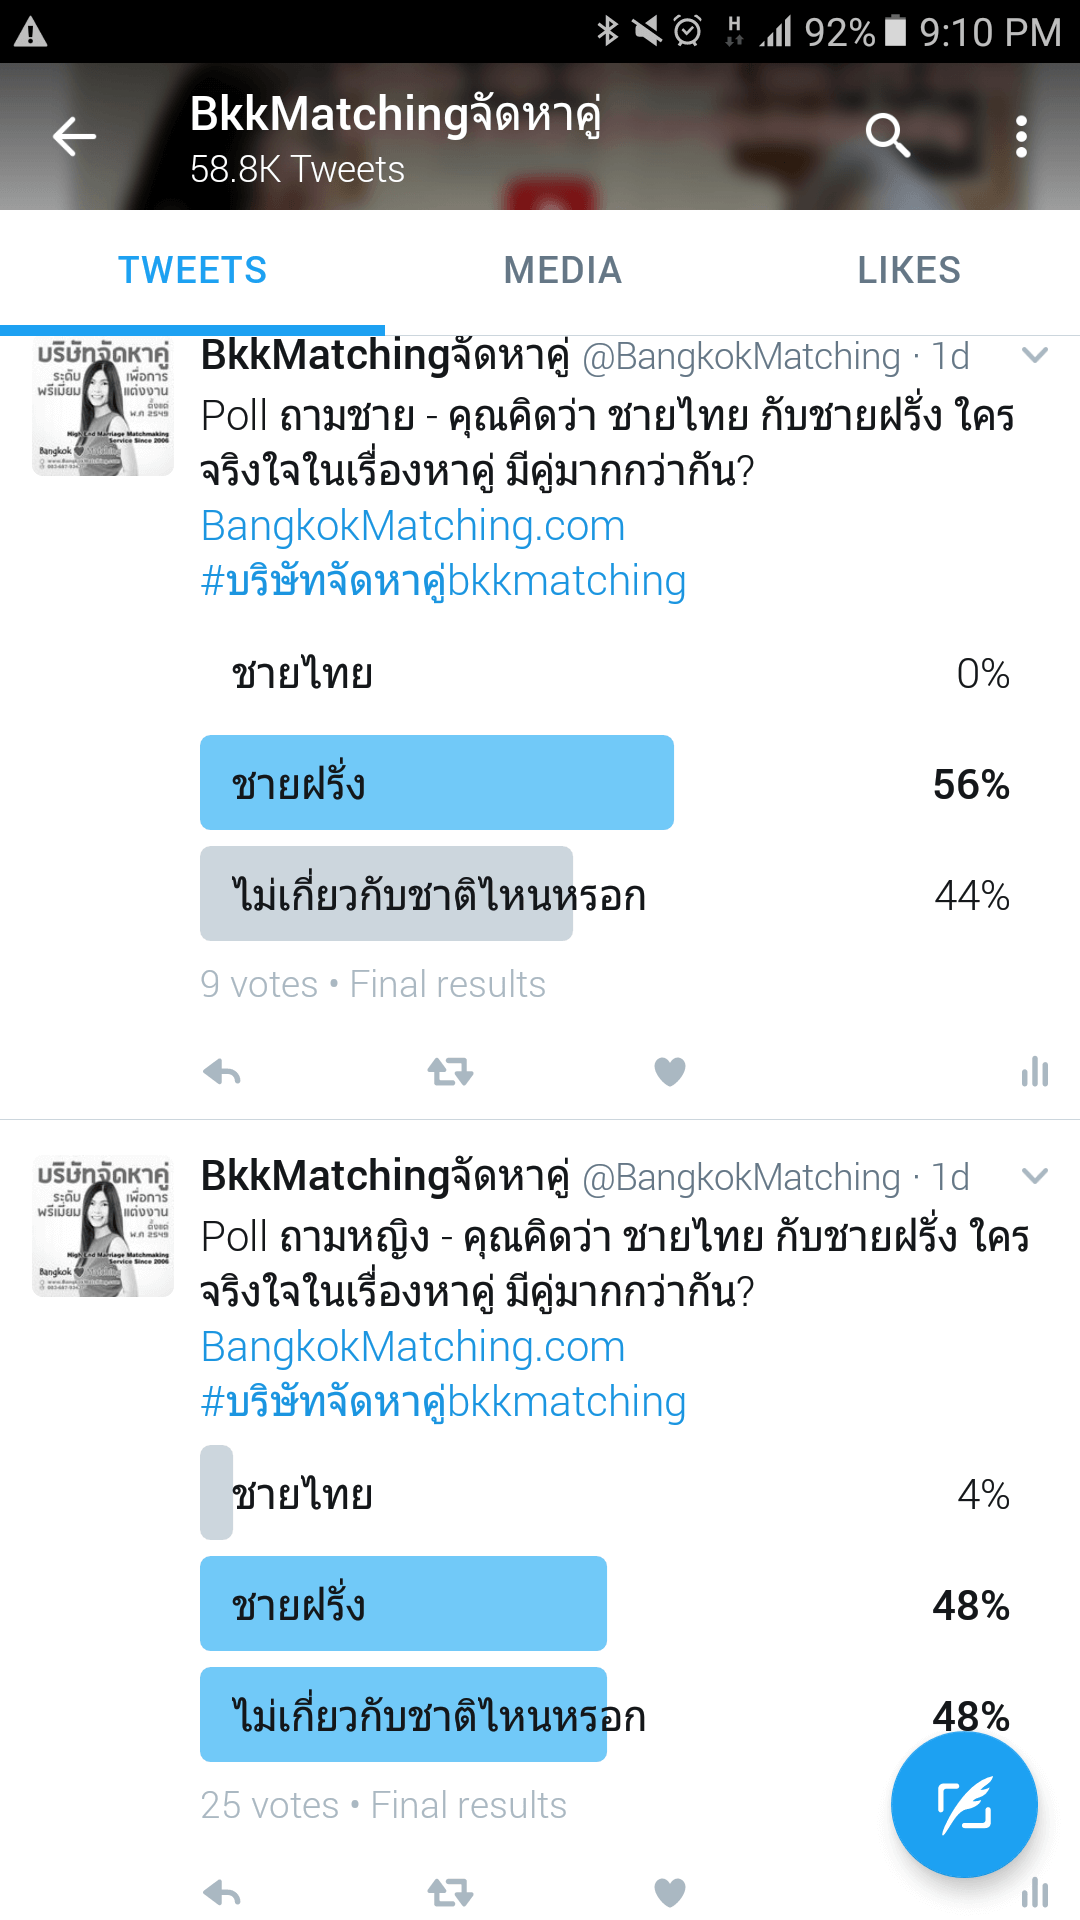 “Dating” Poll of BangkokMatching Dating and “Matchmaking” Agency asking who are more serious in looking for relationship.